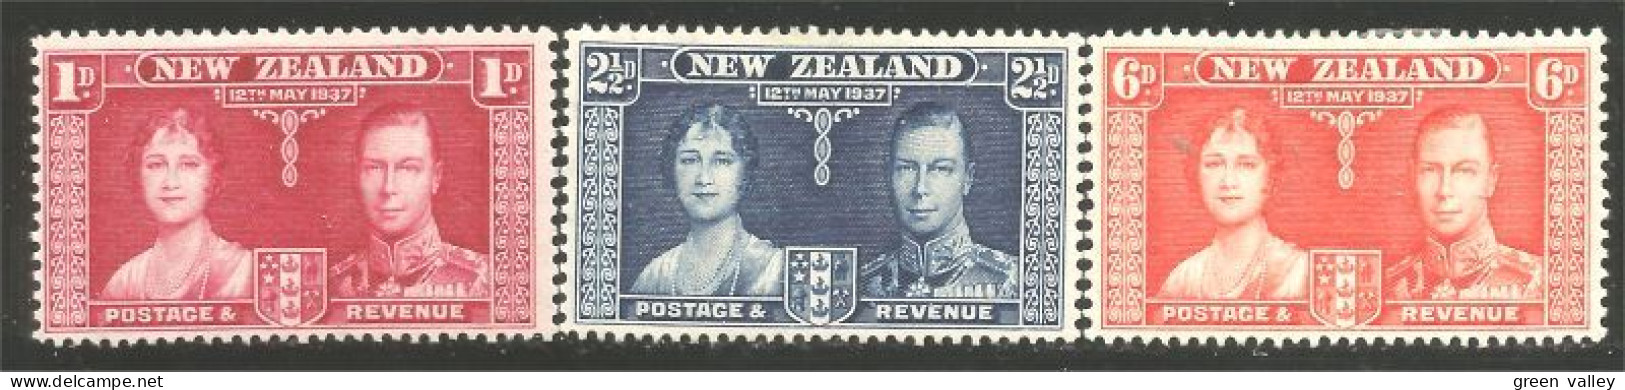 706 New Zealand 1937 Coronation George VI MH * Neuf (NZ-74a) - Unused Stamps